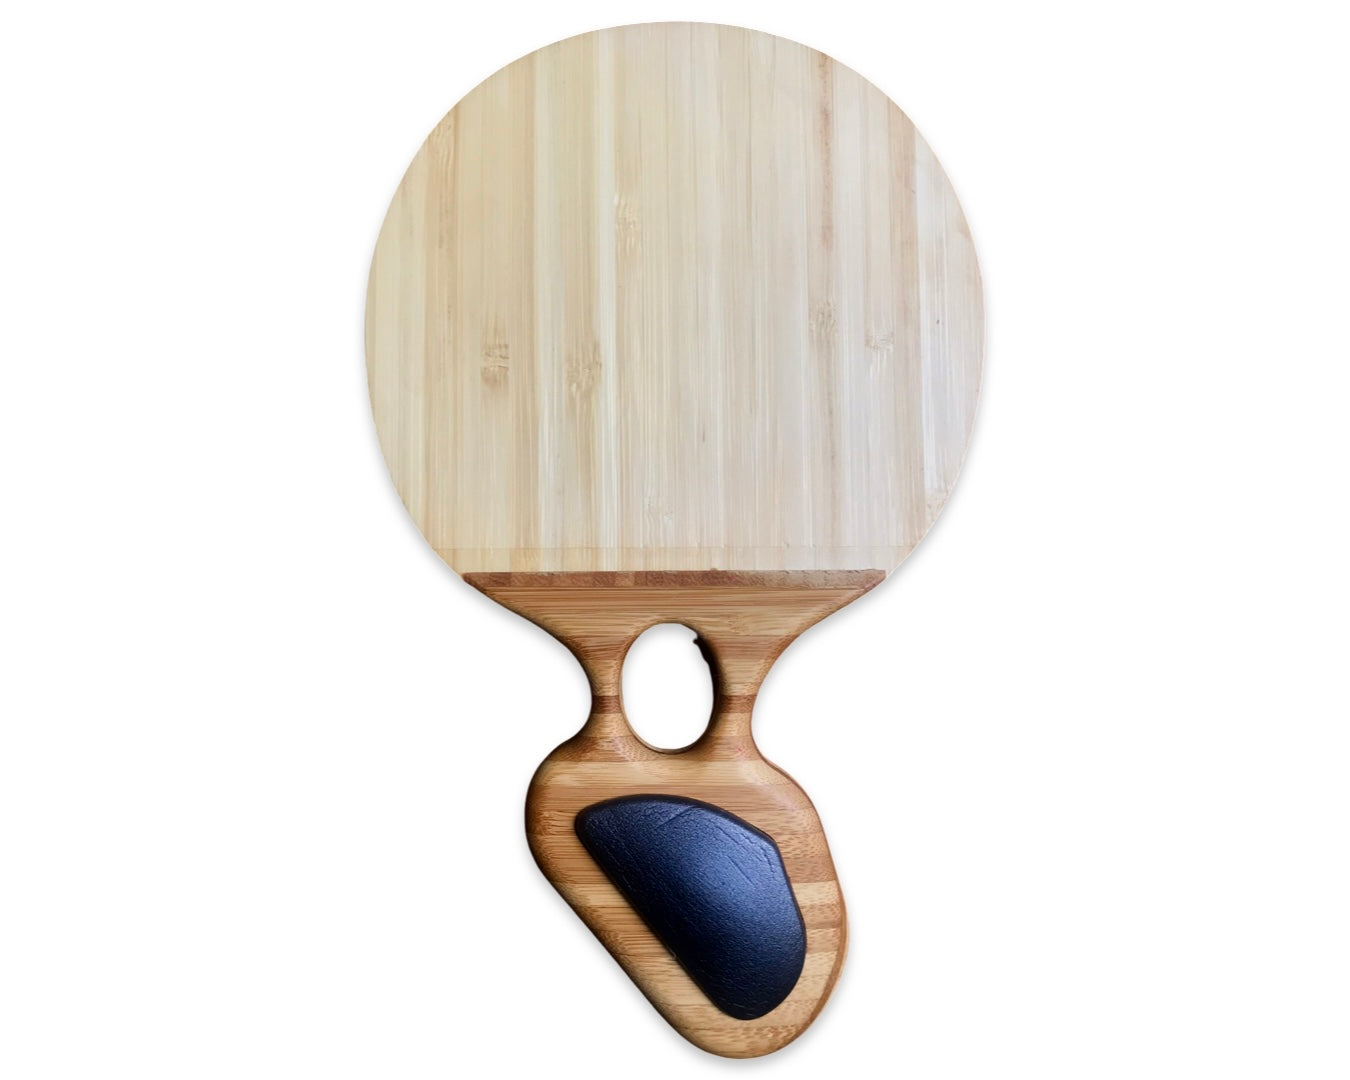 V1 Coconut Paddle (without rubber)